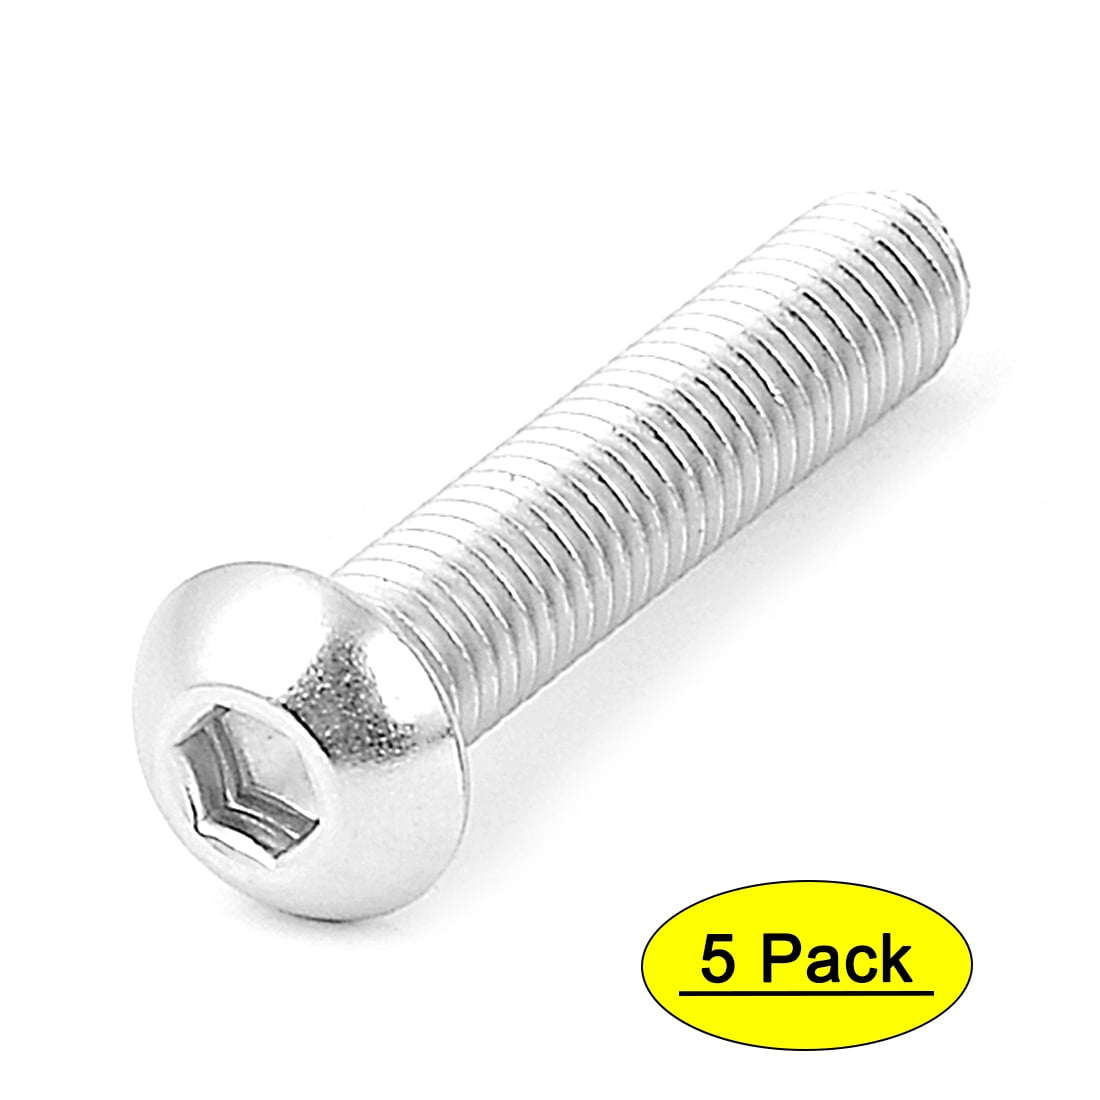 Set Screws 8mm x 80mm Stainless Bolts DIN933 M8 x 80 Stainless Steel Hex Bolts 